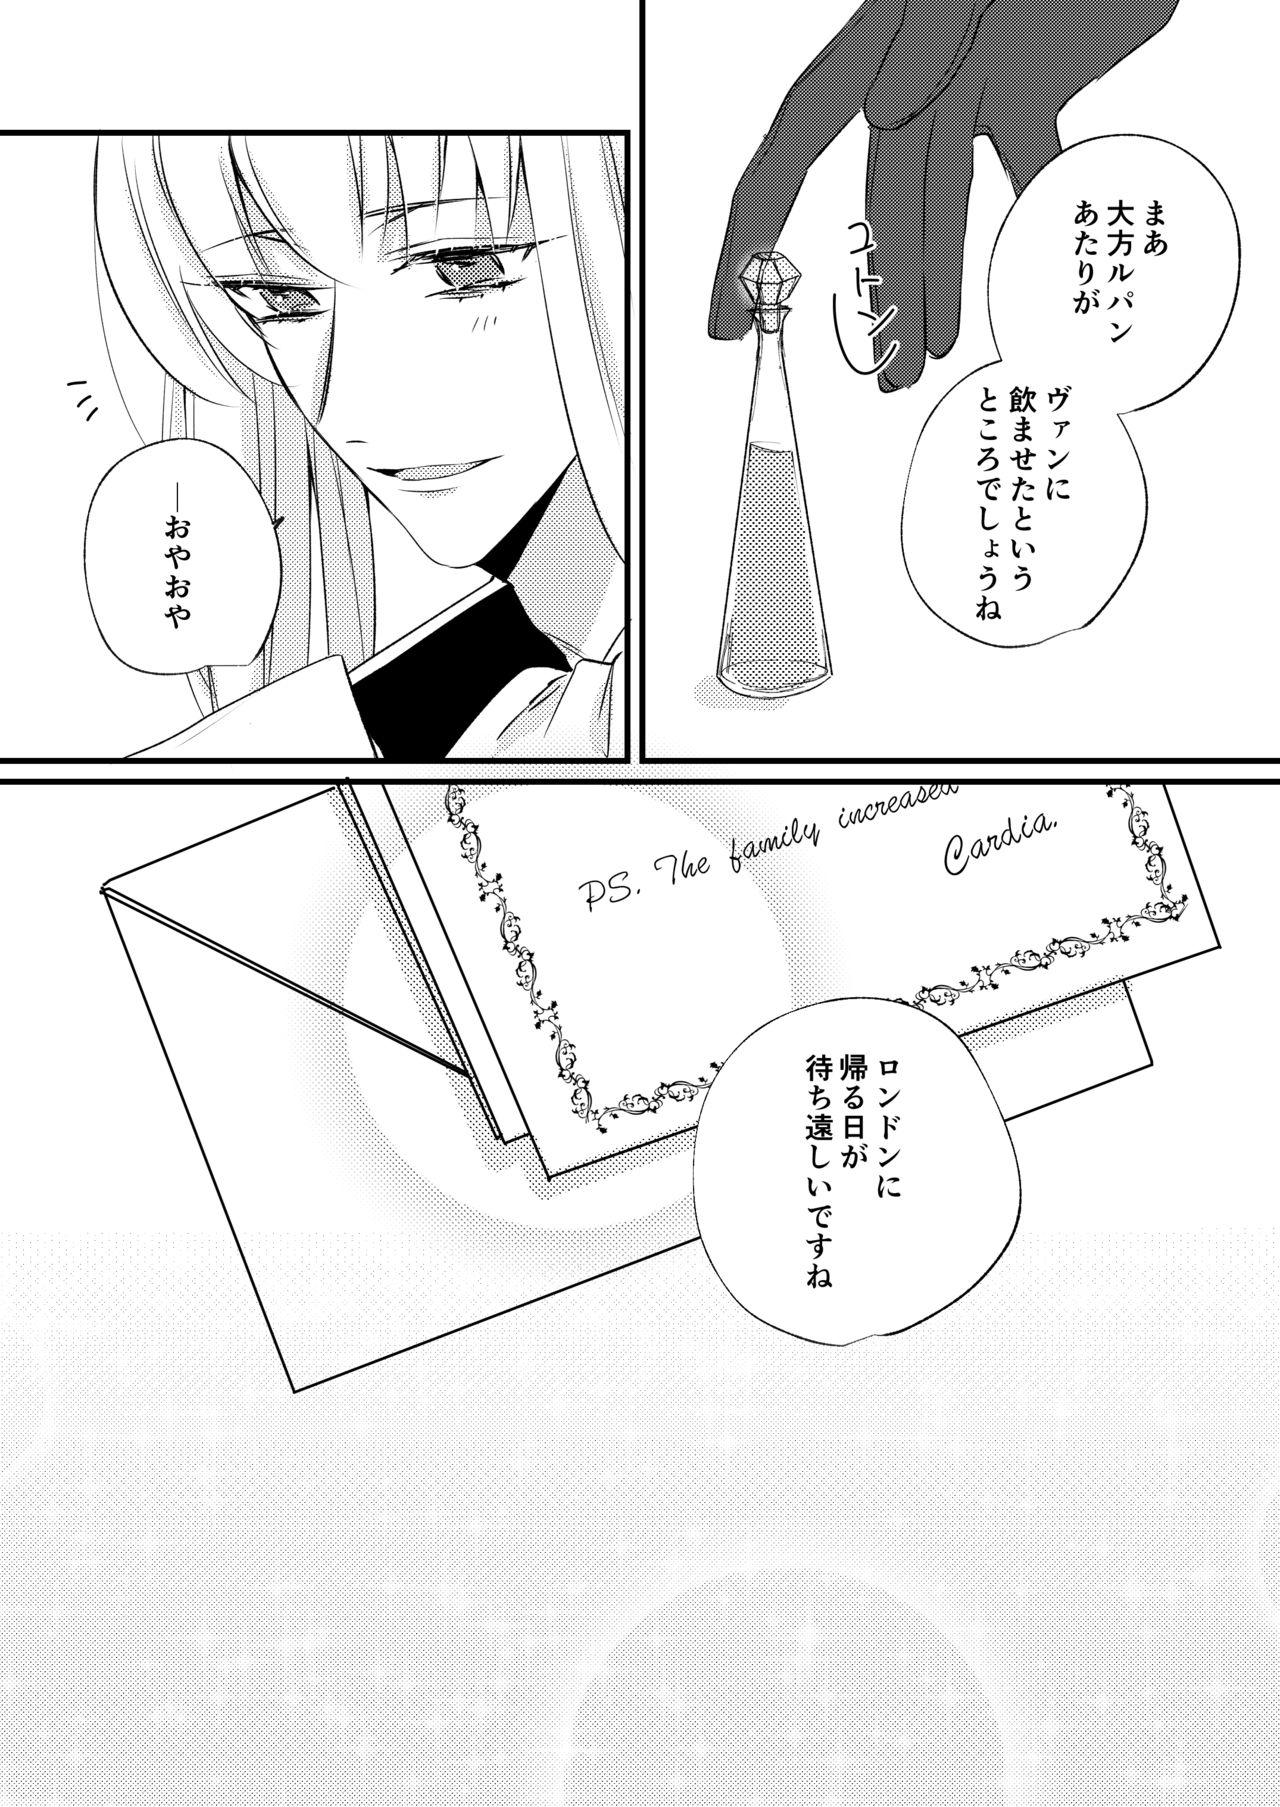 Soft 熱におぼれる - Code realize sousei no himegimi Blonde - Page 28